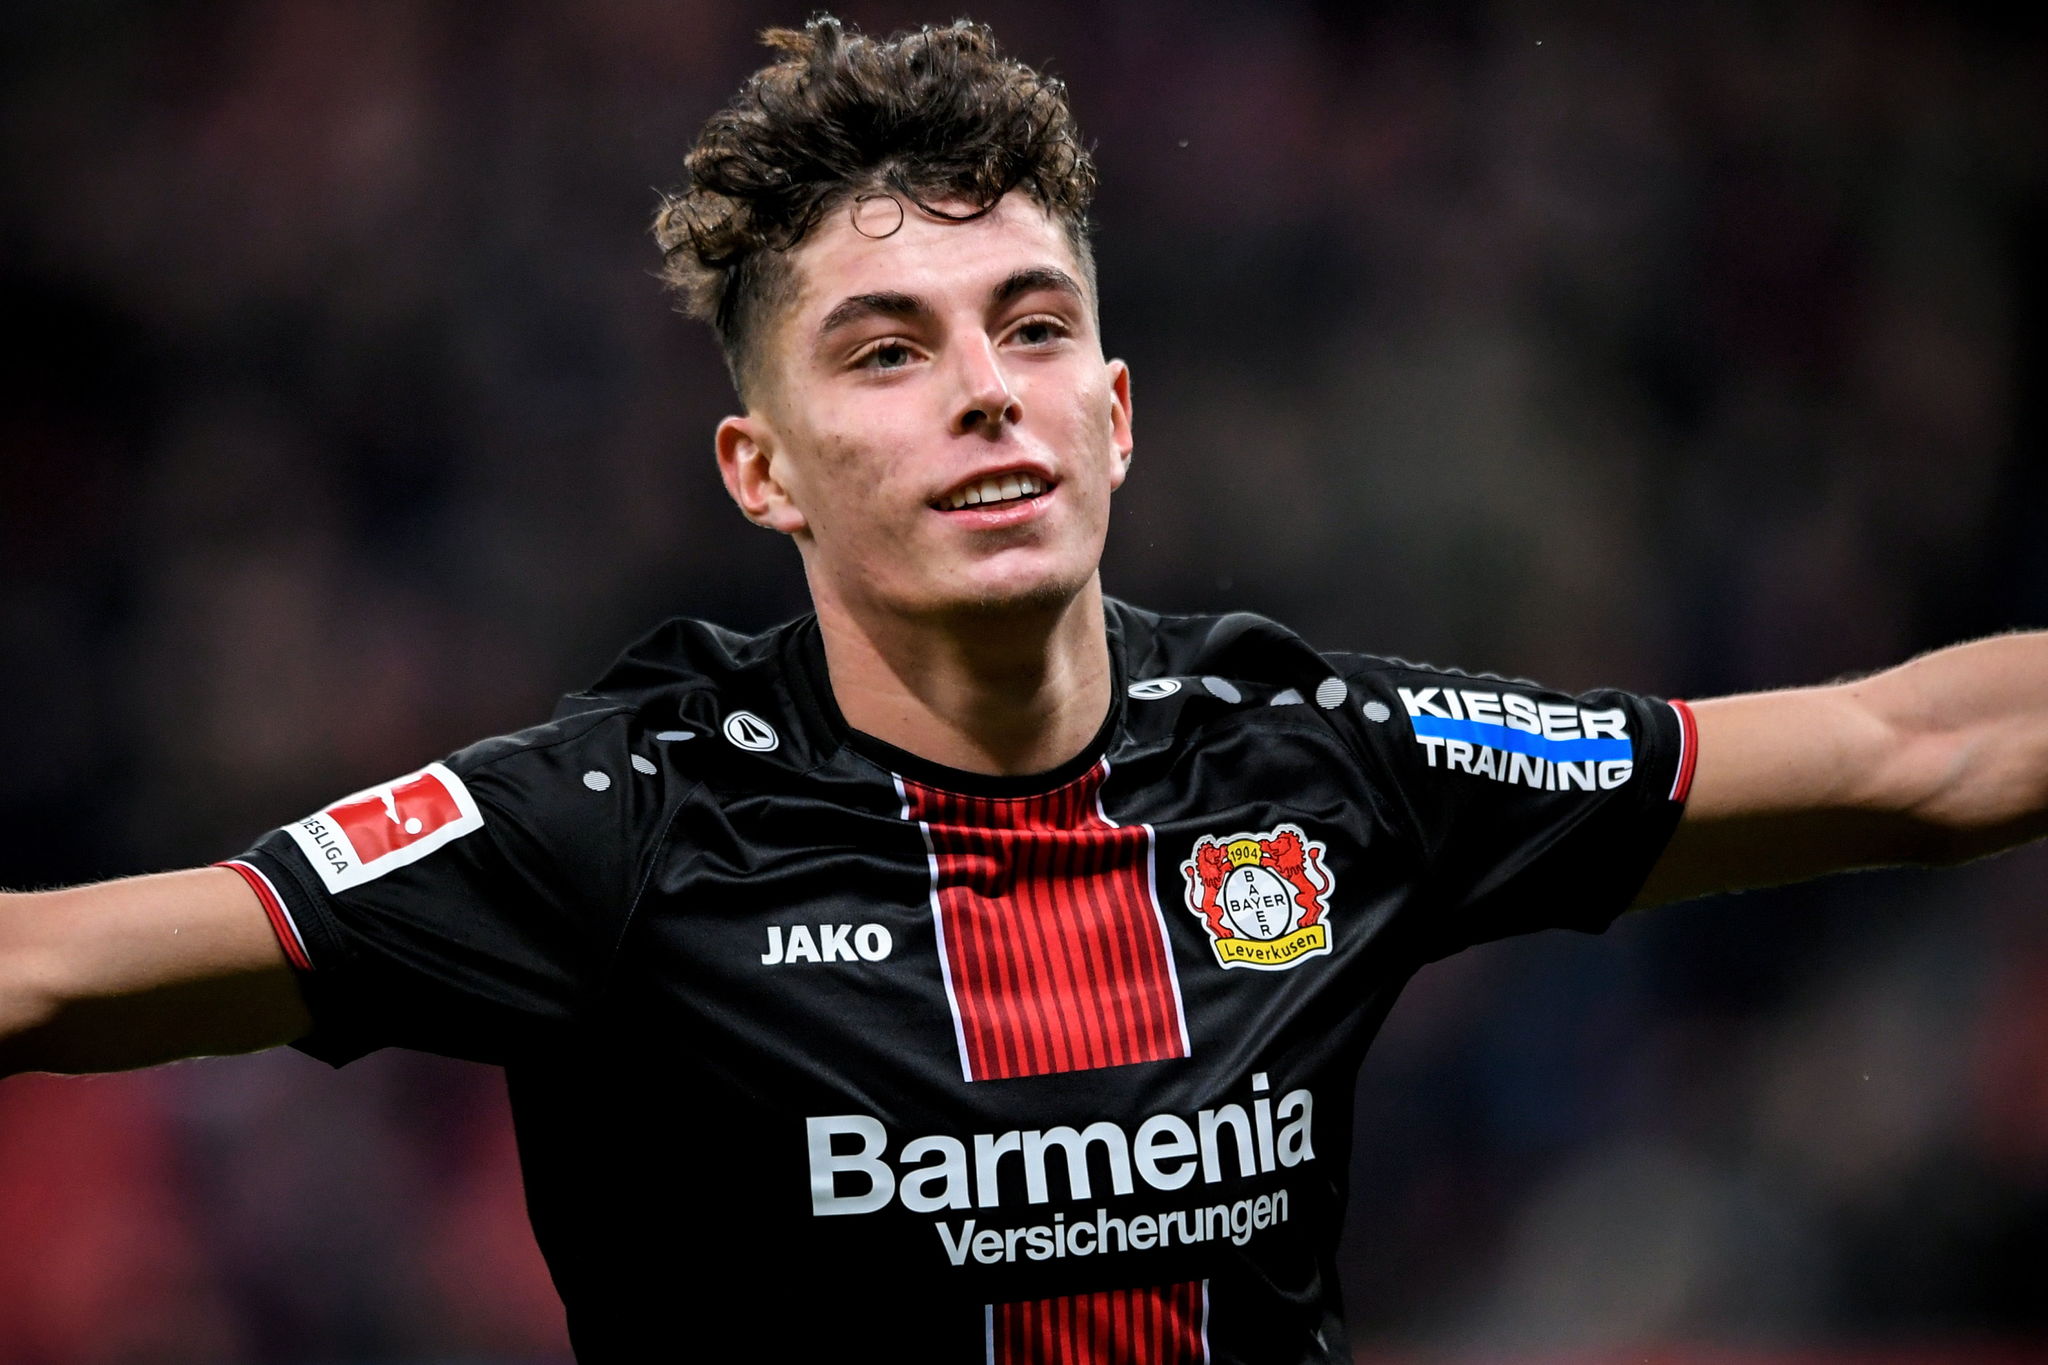 Leverkusen (Germany), 22/12/2018.- Leverkusens Kai <HIT>Havertz</HIT> celebrates after scoring the 3-1 lead during the German Bundesliga soccer match between Bayer Leverkusen and Hertha BSC in Leverkusen, Germany, 22 December 2018. (Alemania) EFE/EPA/SASCHA STEINBACH CONDITIONS - ATTENTION: The DFL regulations prohibit any use of photographs as image sequences and/or quasi-video